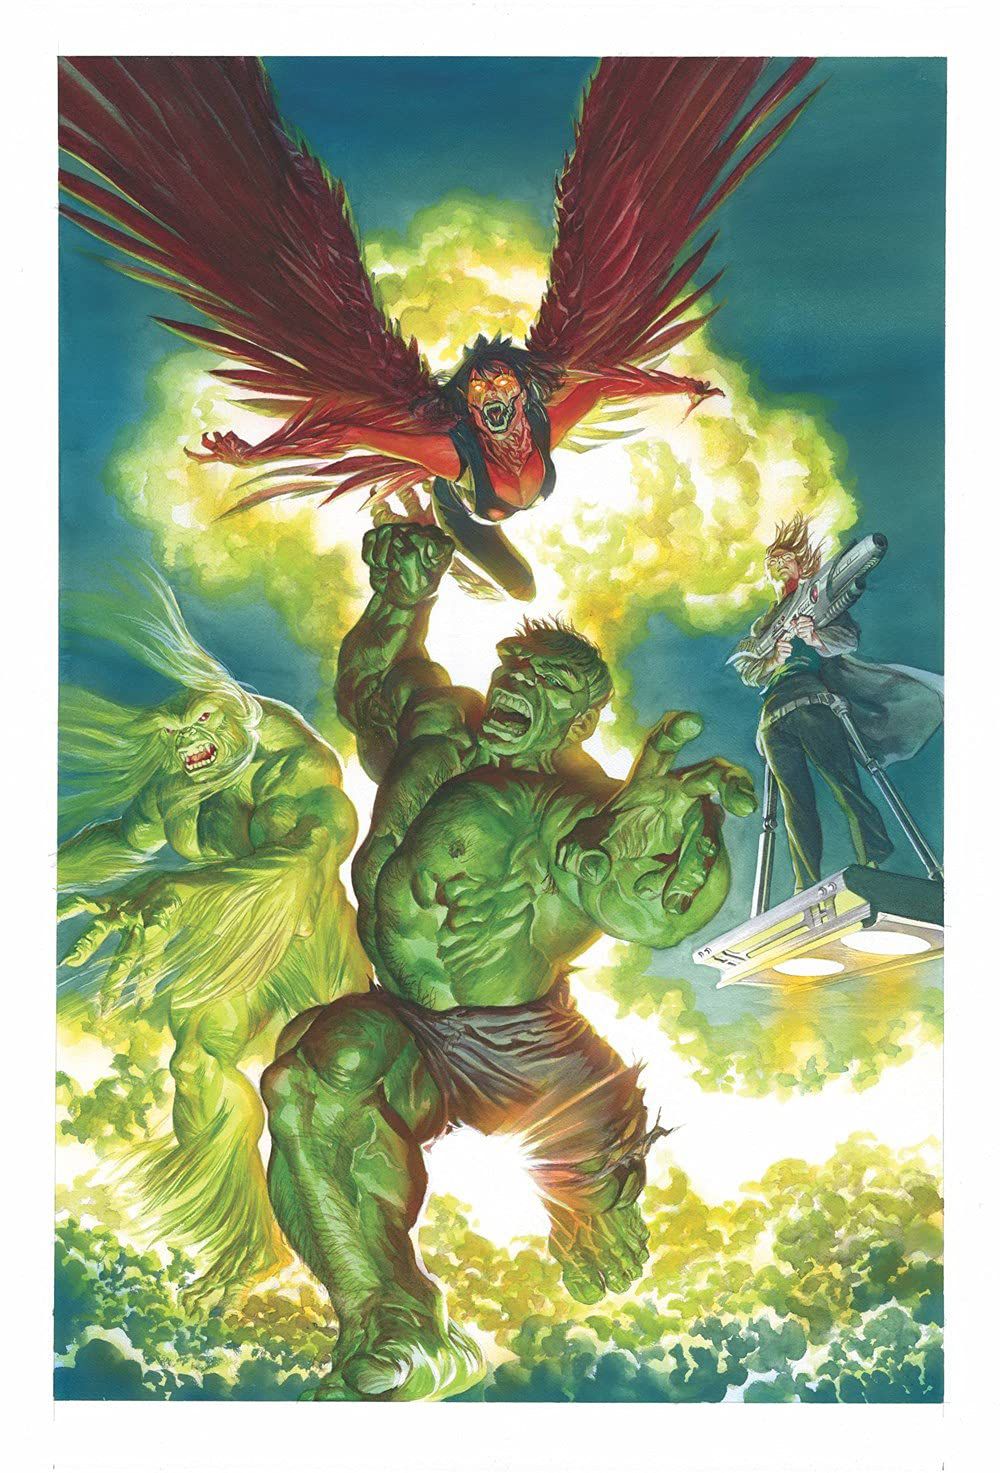 The Hulk, and allies leap towards the reader, with a massive green mushroom cloud behind them.